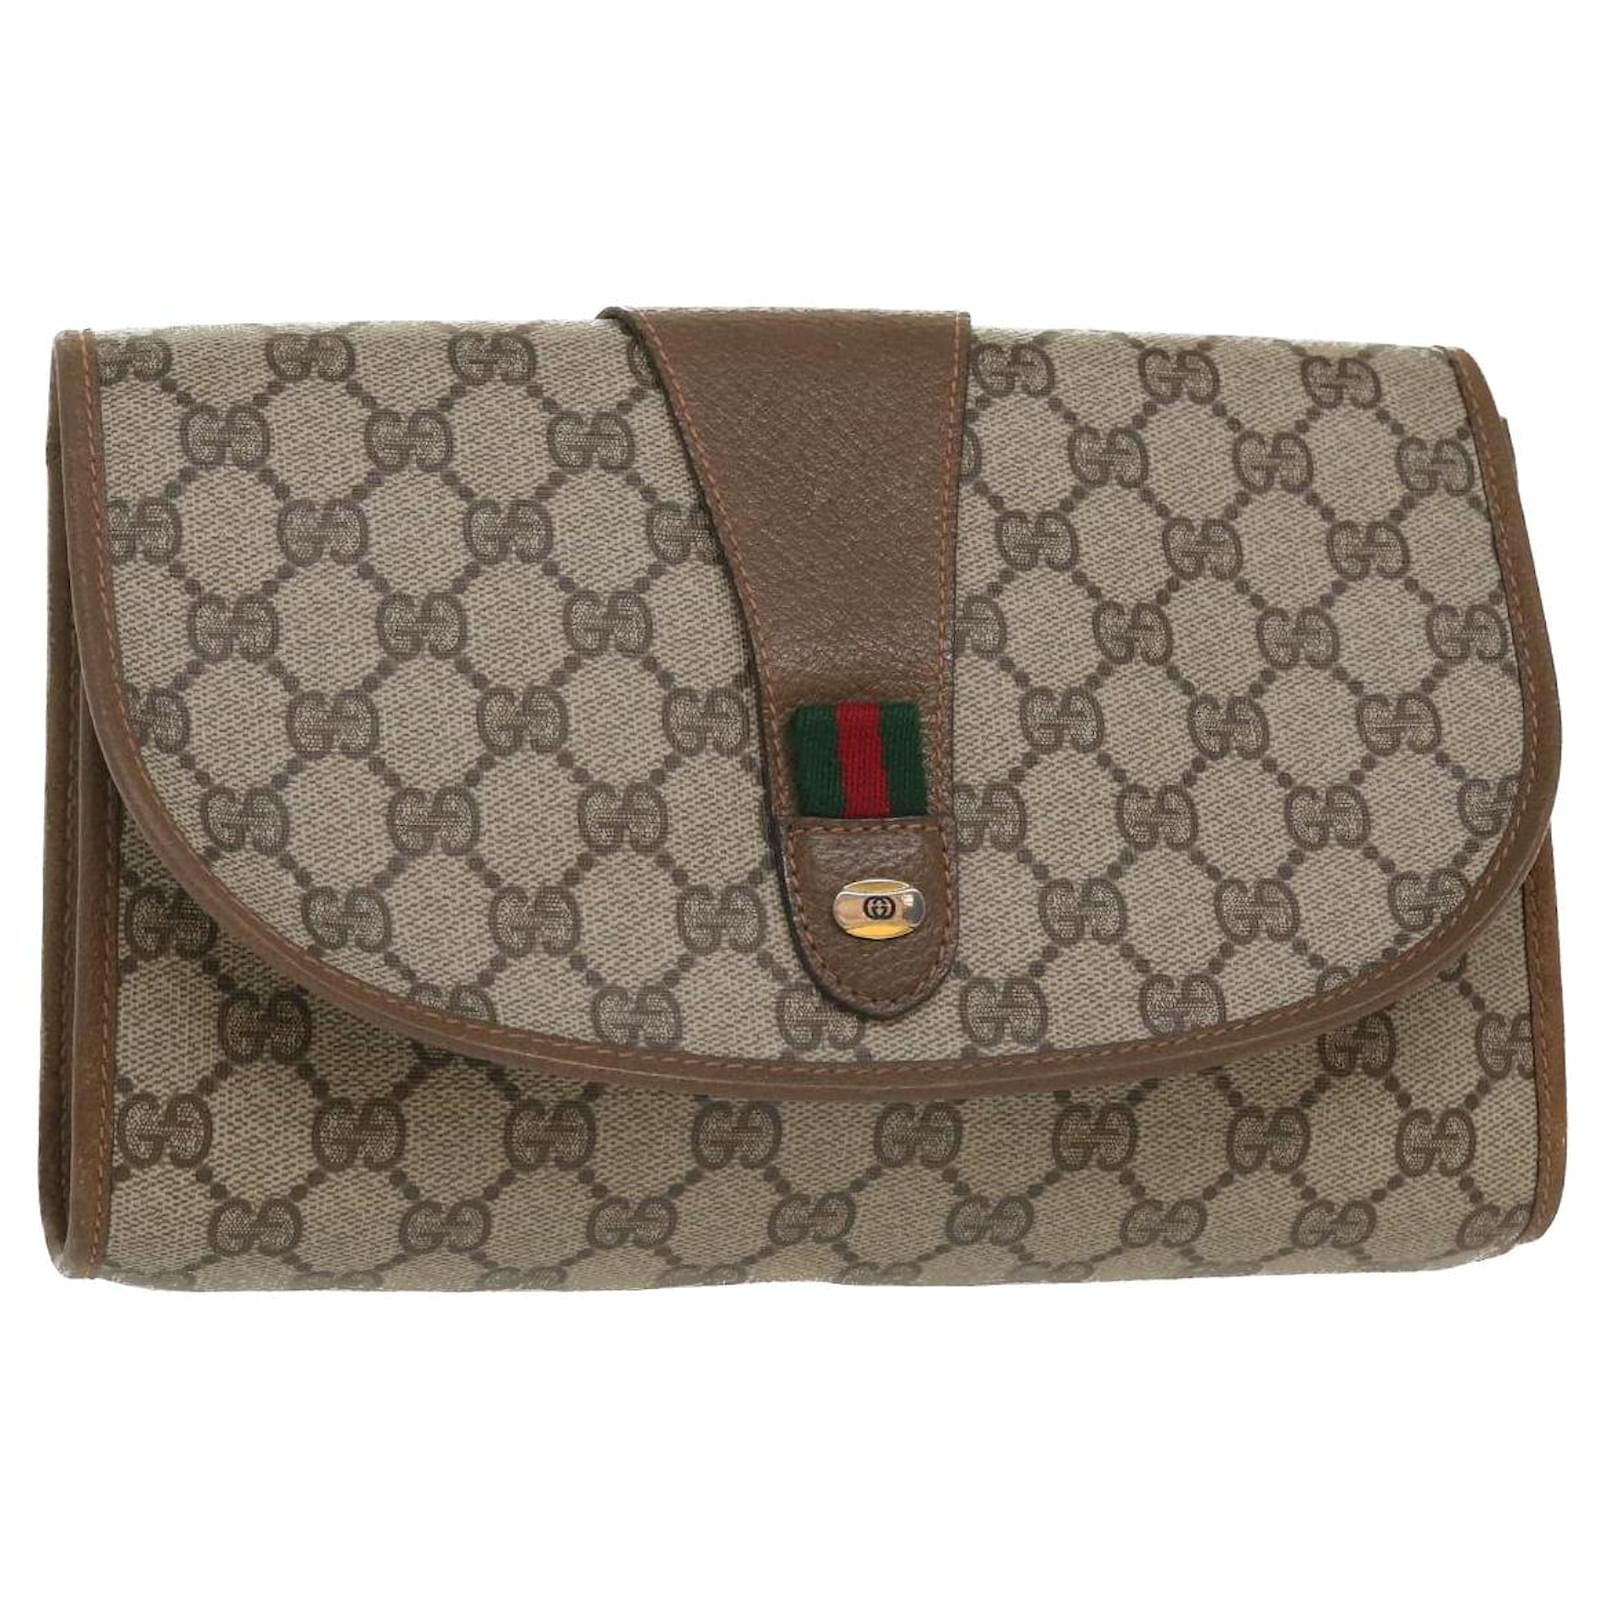 GUCCI GG Canvas Web Sherry Line Clutch Bag Beige Red Green 8901030 Auth ...